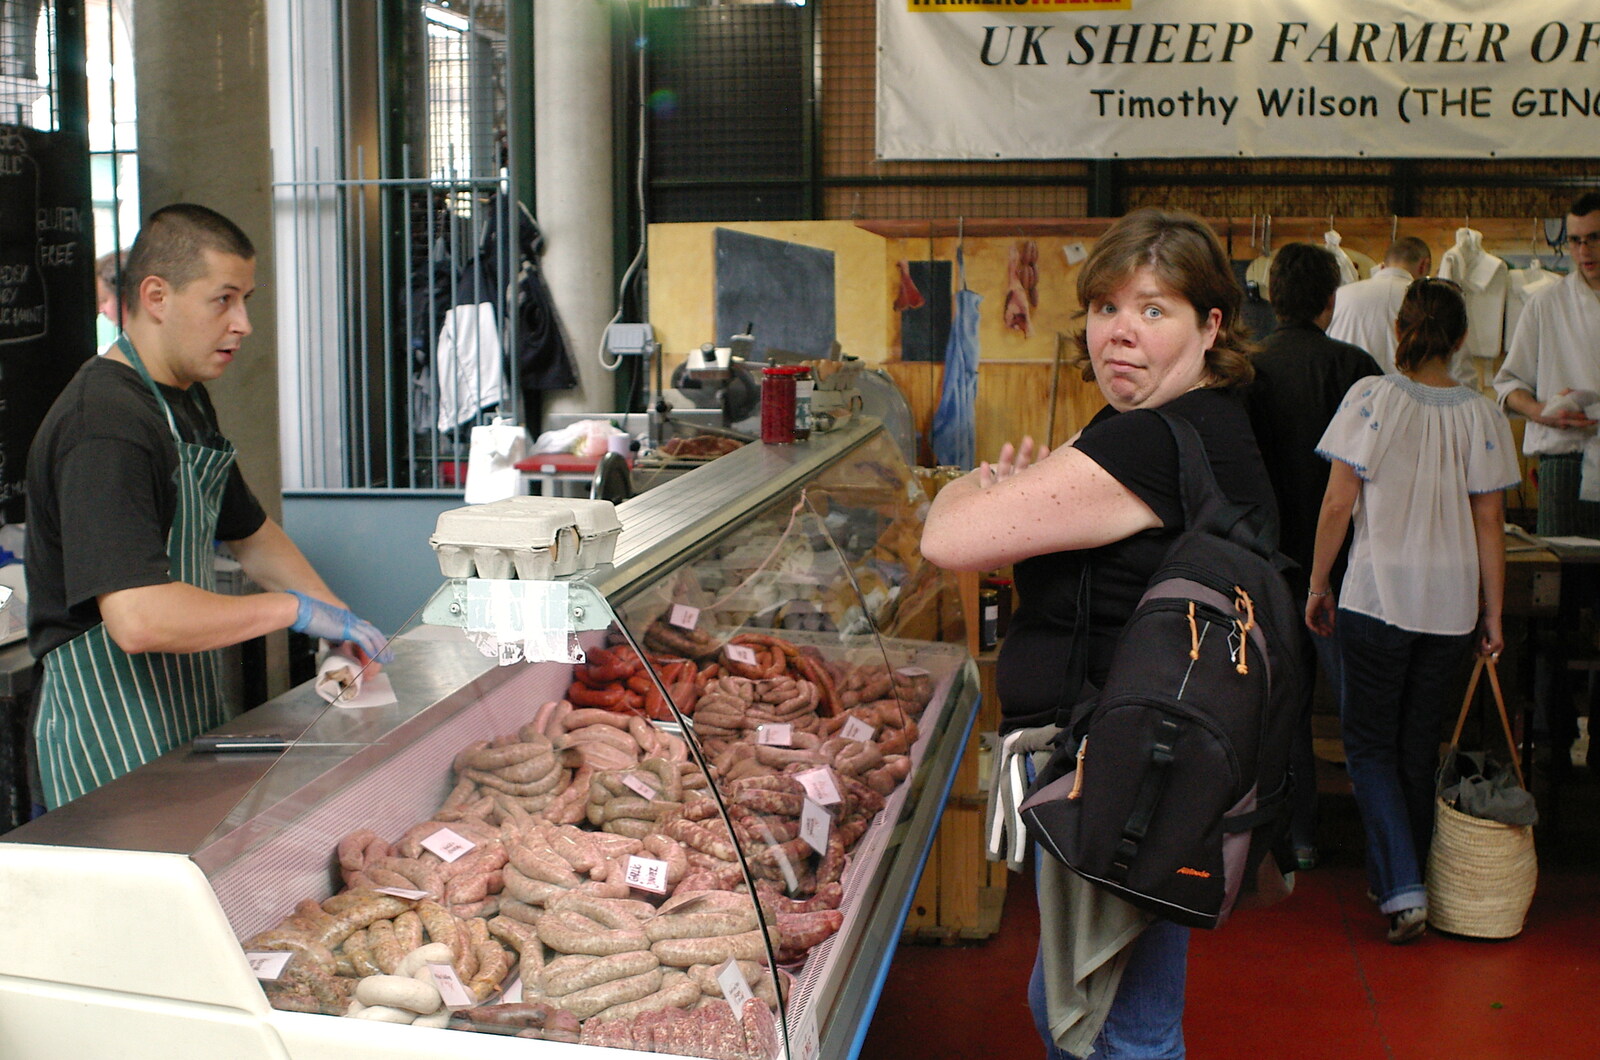 Sis gets some sausages from Borough Market and North Clapham Tapas, London - 23rd July 2005